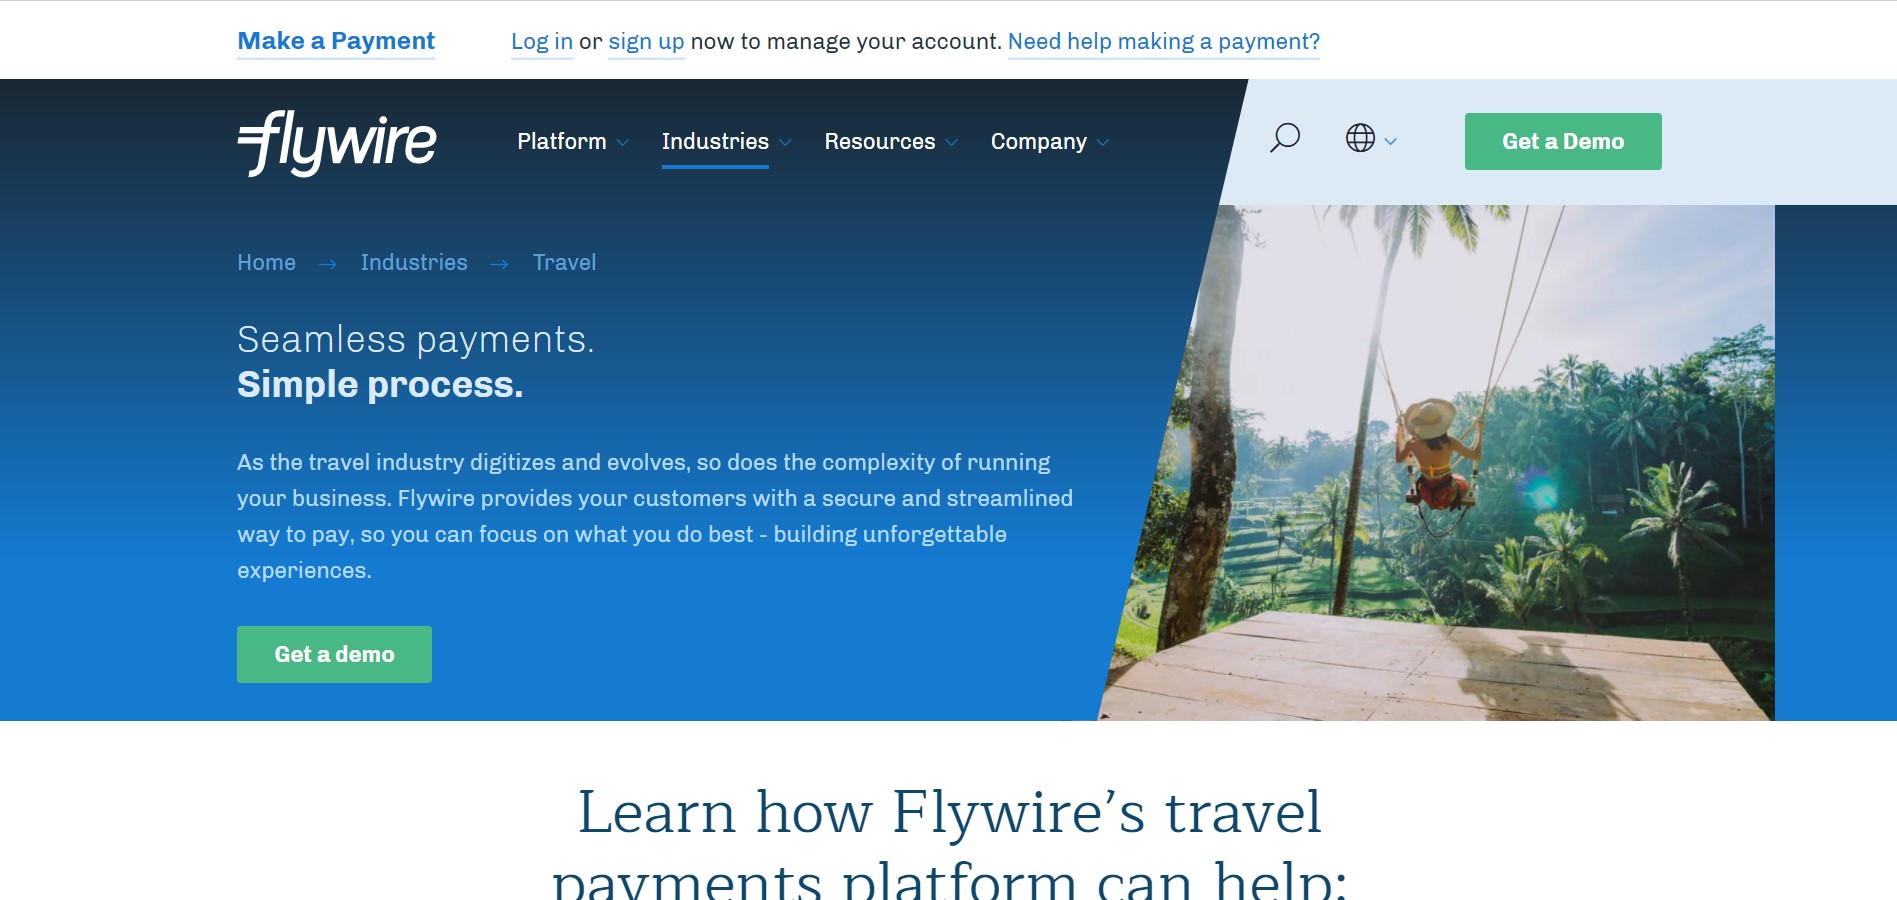 Flywire product / service